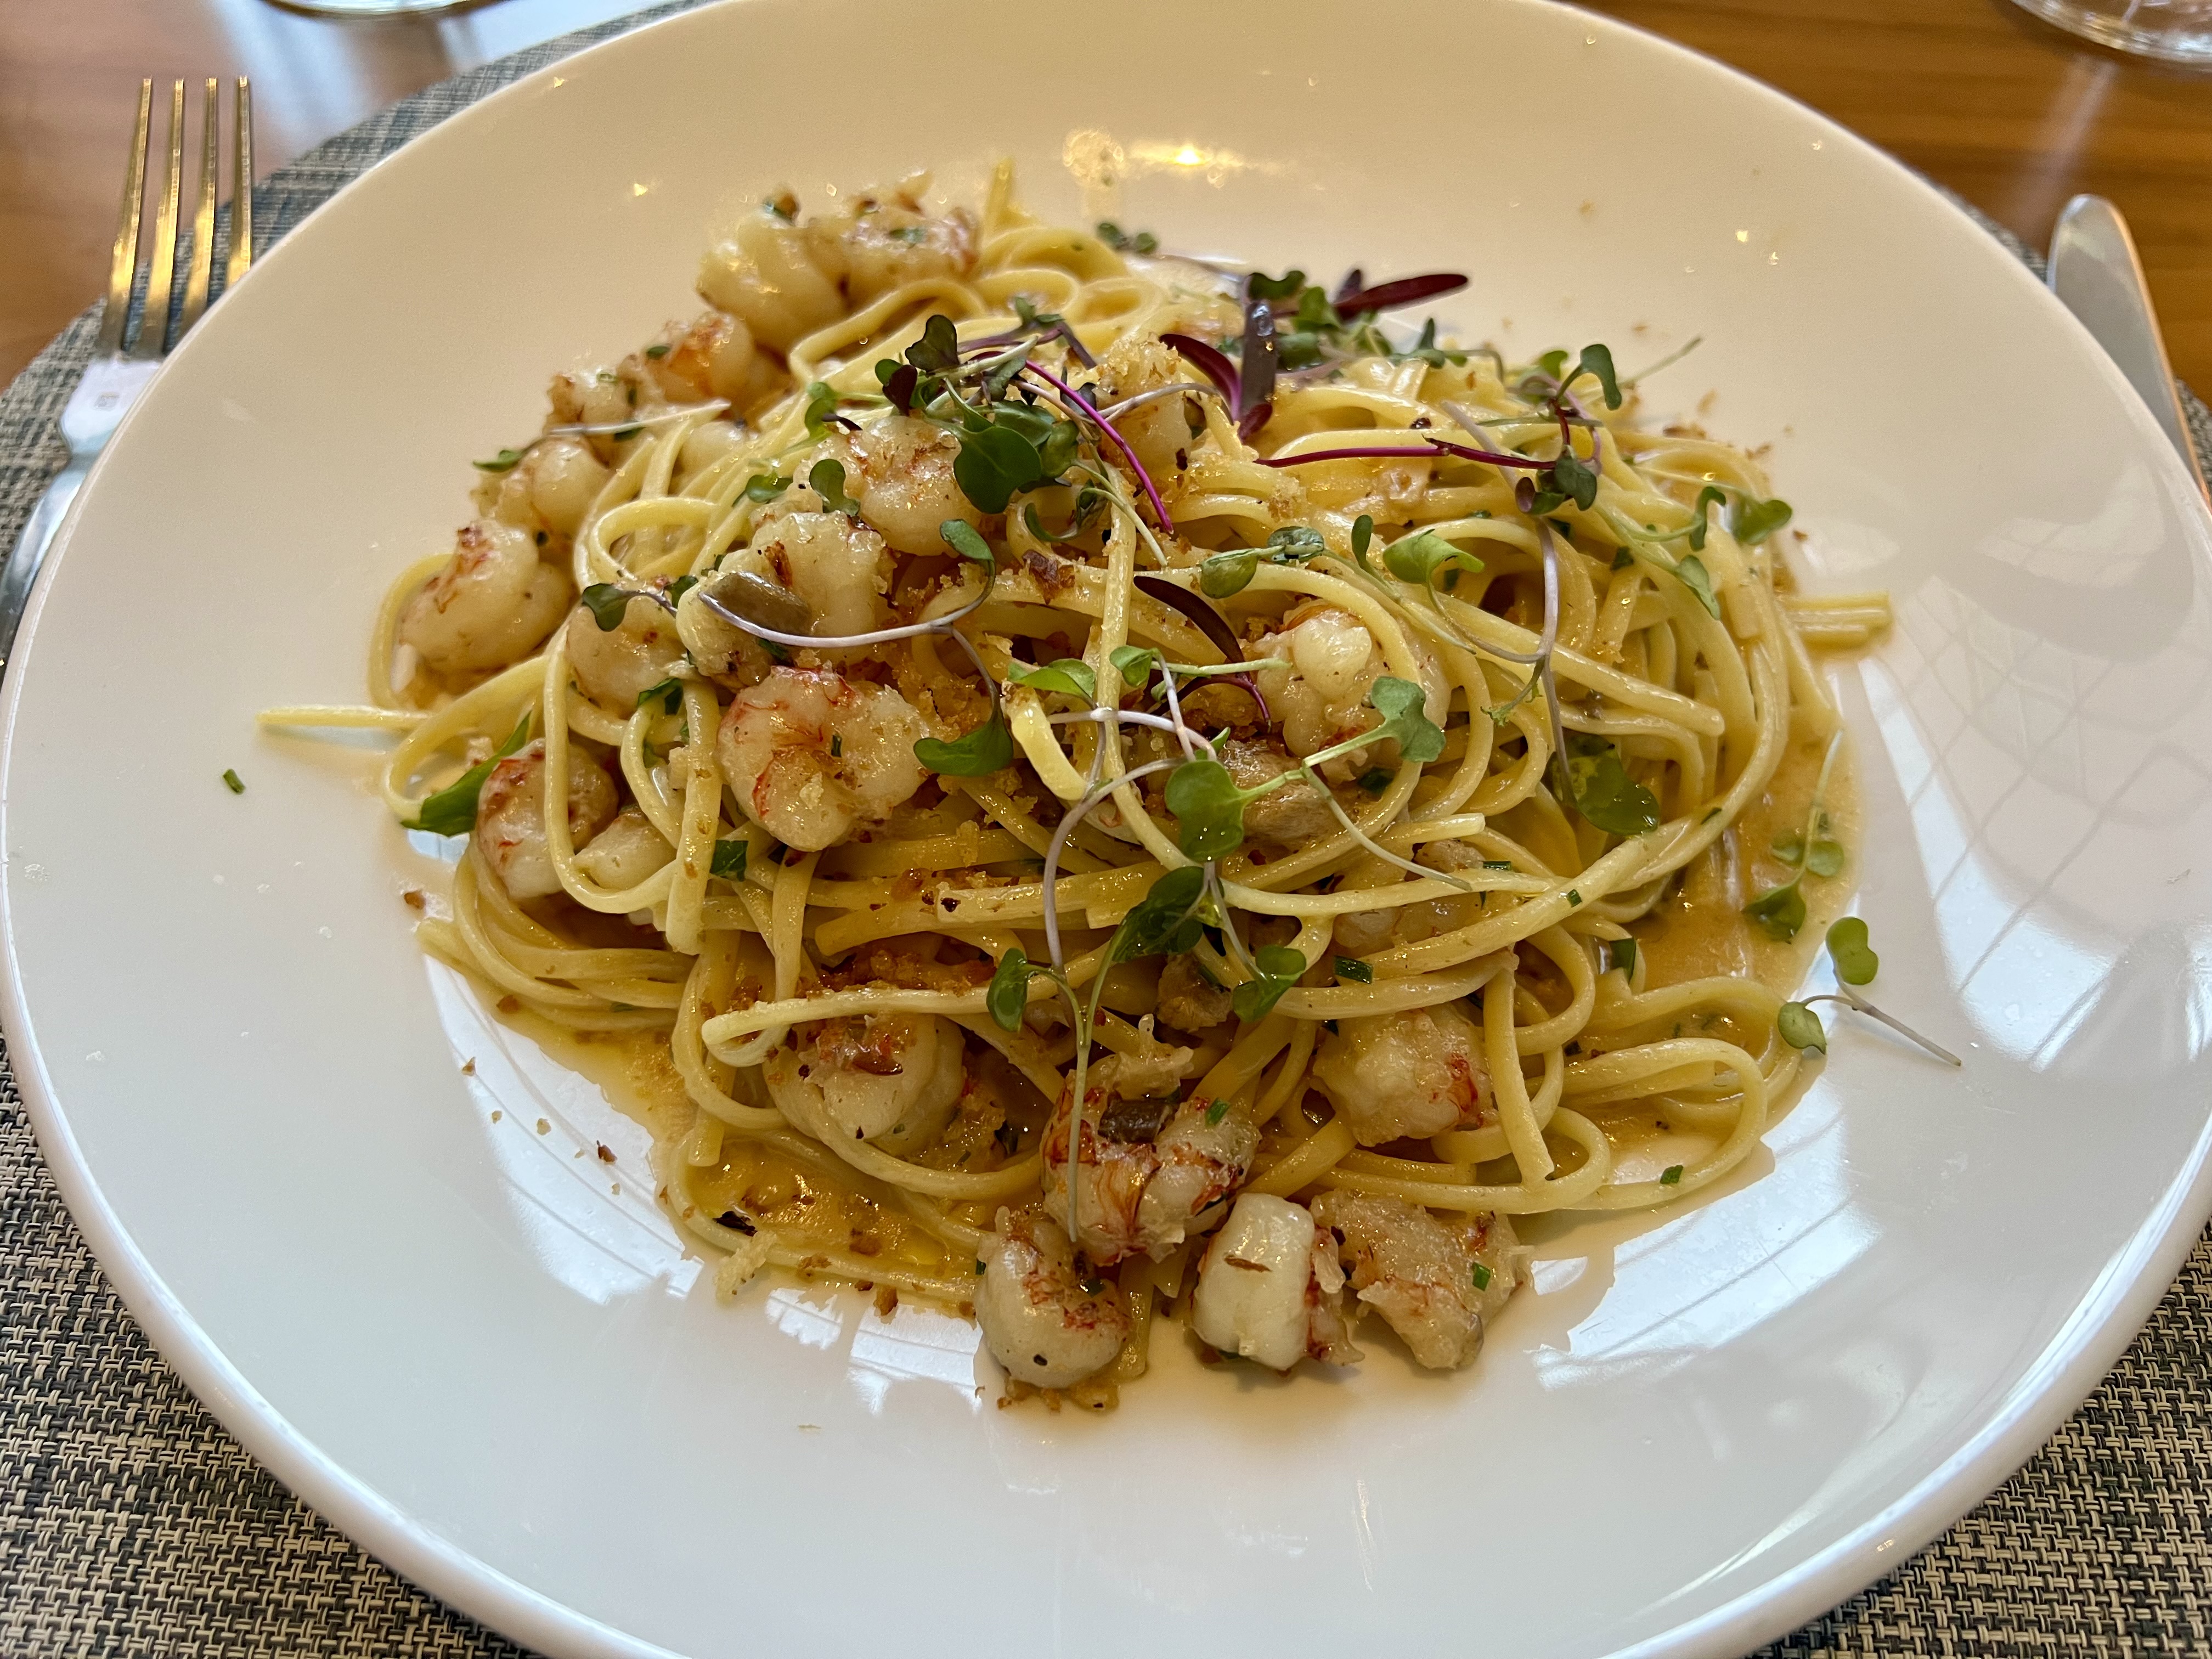 a plate of pasta with shrimp and herbs